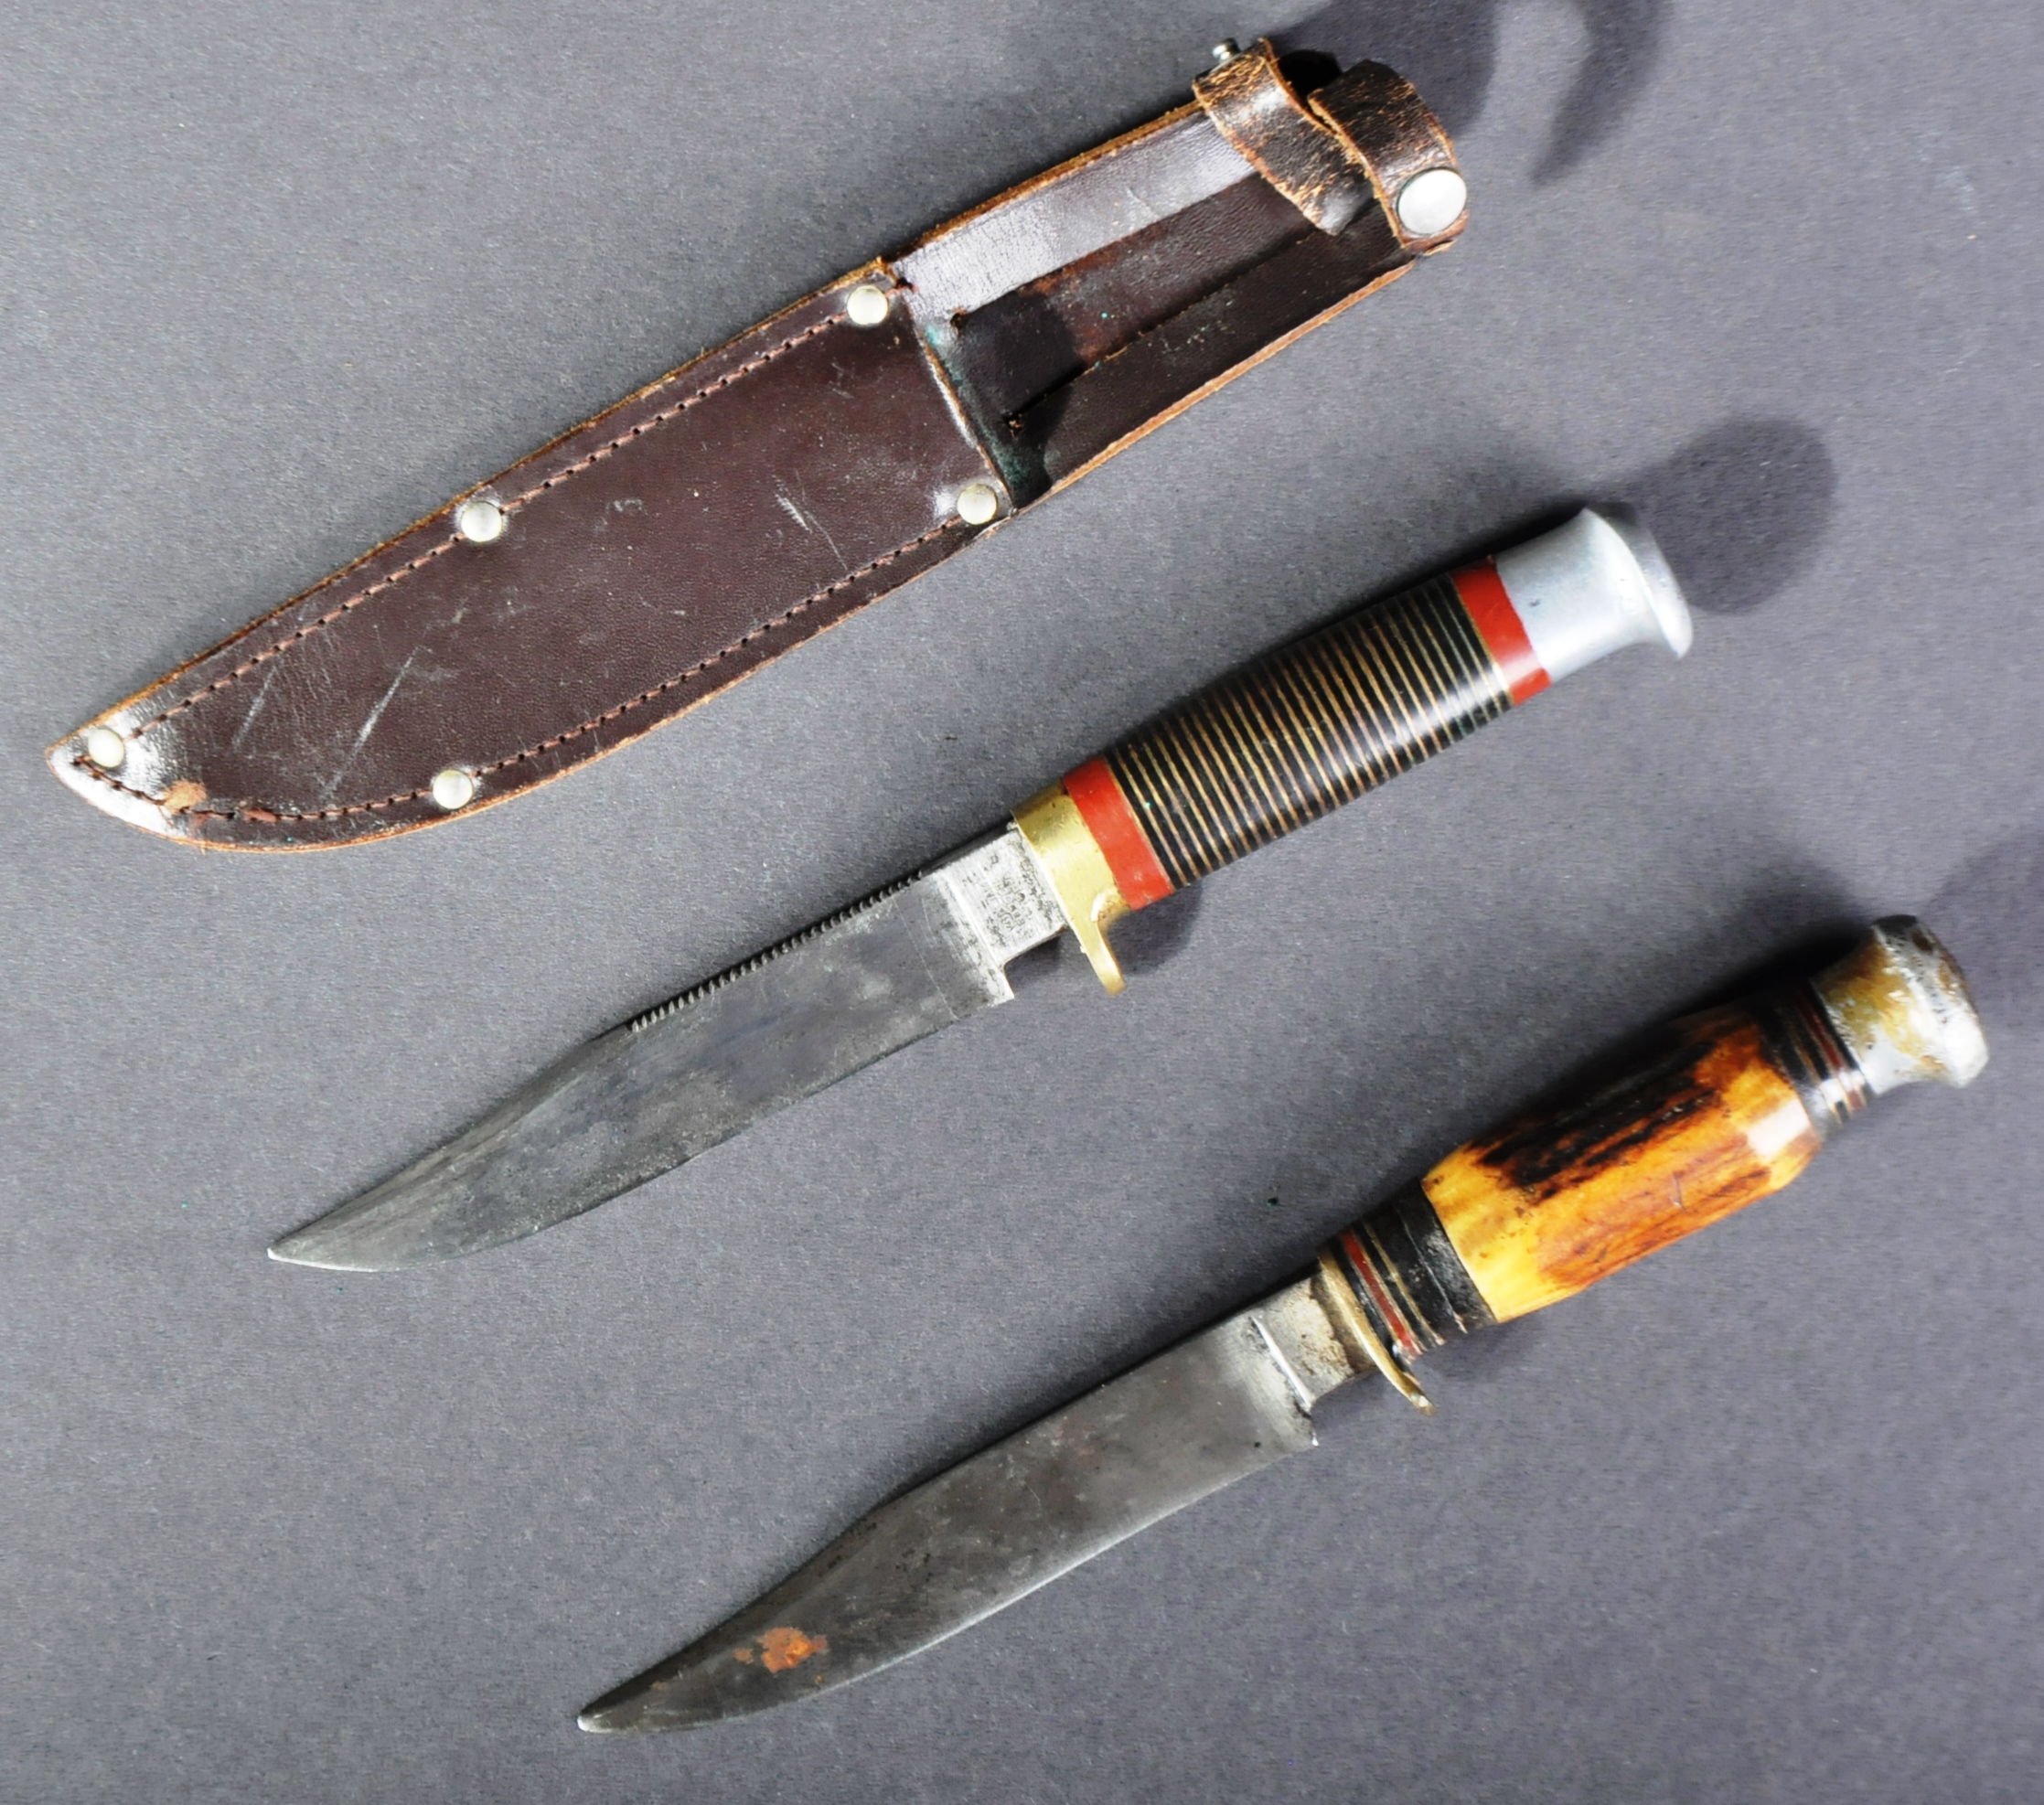 EDGED WEAPONS - TWO VINTAGE KNIVES / DAGGERS